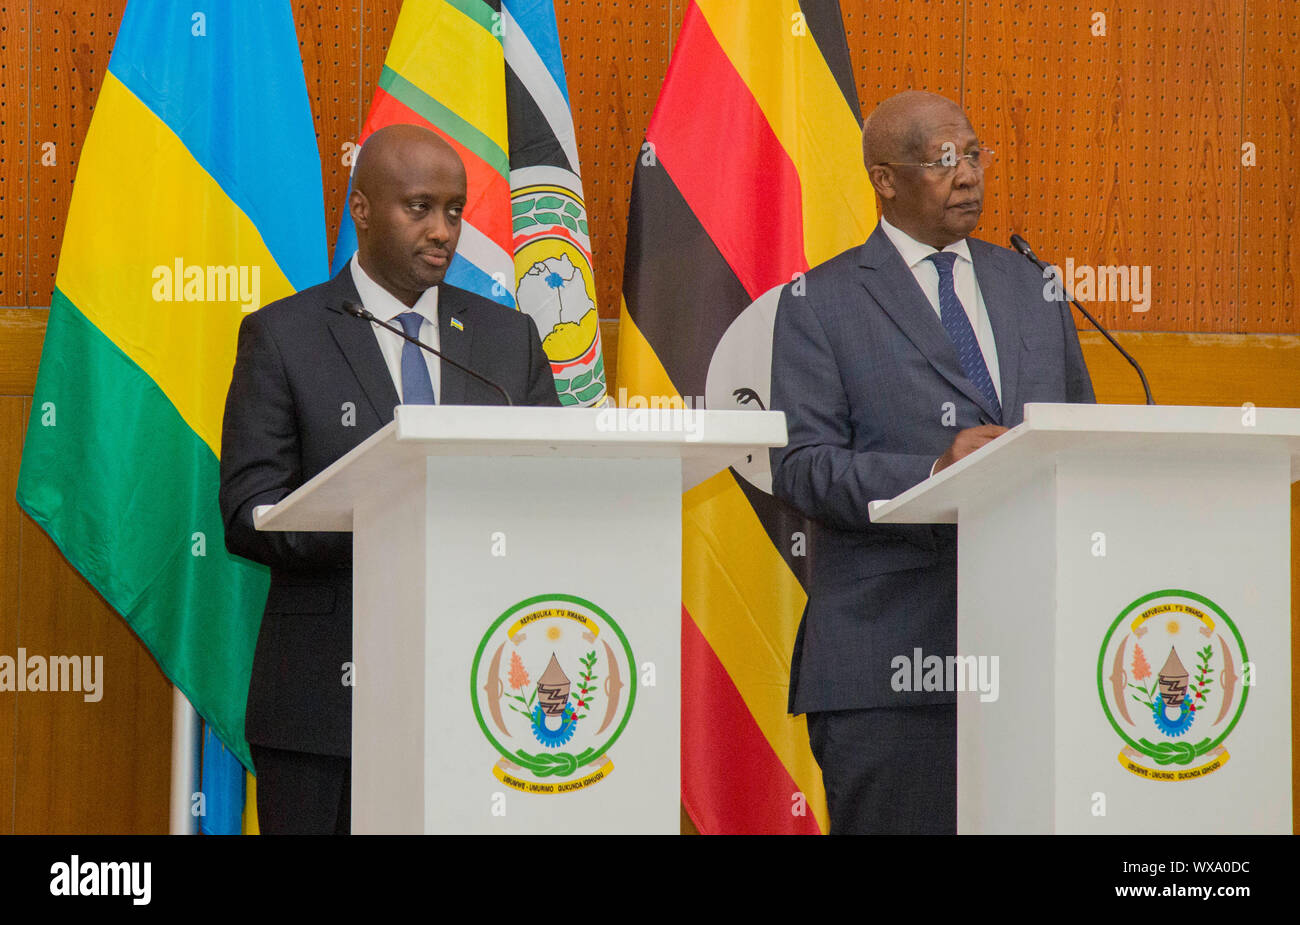 (190916) -- KIGALI, Sept. 16, 2019 (Xinhua) -- Ugandan Foreign Minister Sam Kutesa (R) and Rwandan Minister of State in Charge of East African Affairs Olivier Nduhungirehe attend a joint press conference after the first meeting of the ad hoc commission of the memorandum of understanding (MoU) signed in August to cease hostilities between Uganda and Rwanda, in Kigali, capital of Rwanda, on Sept. 16, 2019. Rwanda and Uganda on Monday reiterated their commitment to refraining any act of destabilization against each other following deliberations at the first meeting of the ad hoc commission of the Stock Photo